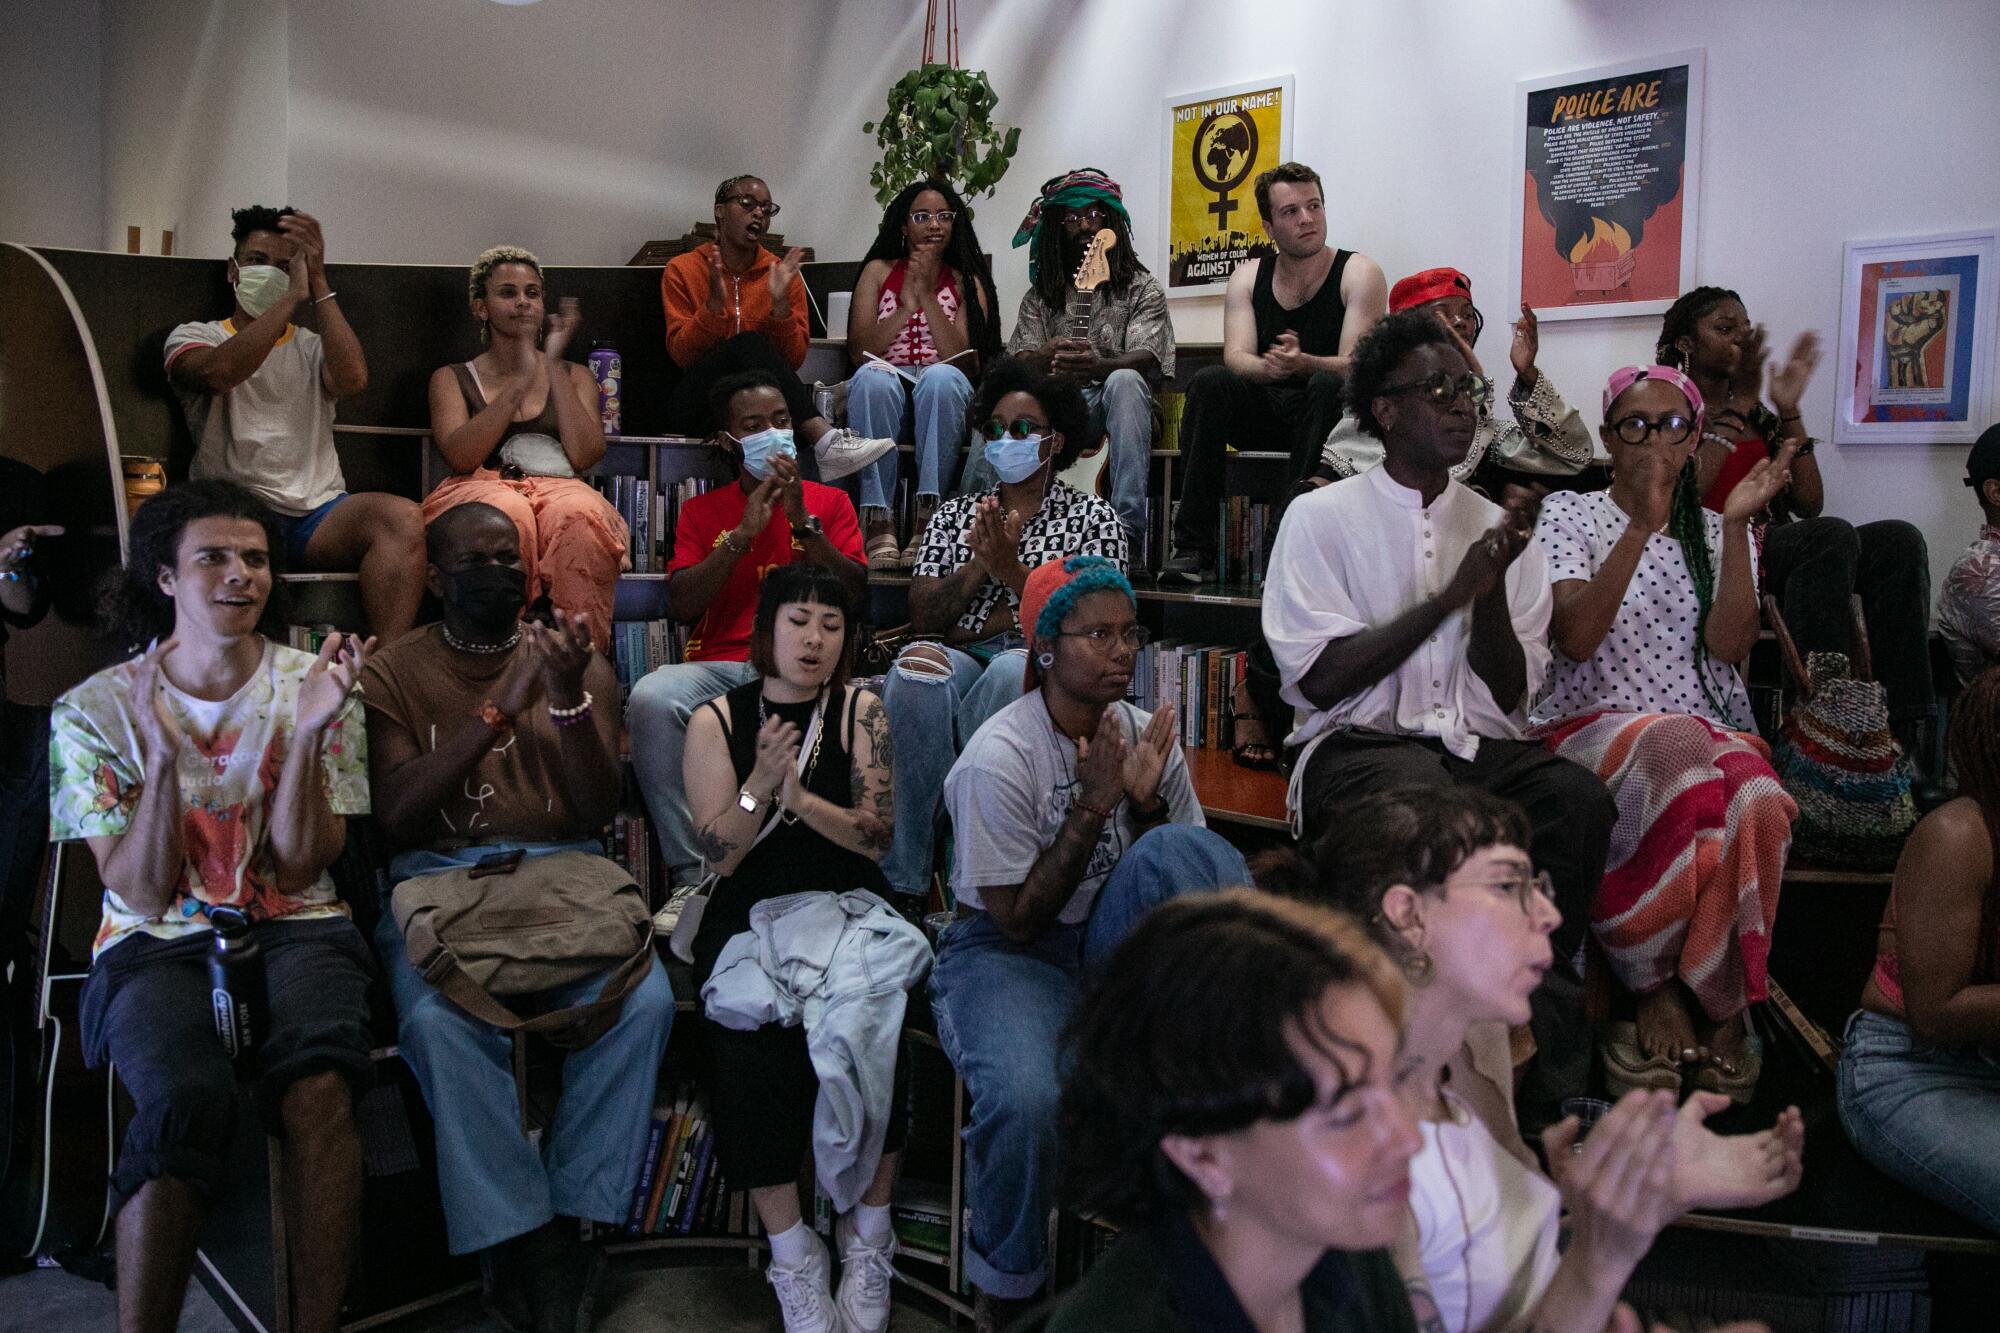 The crowd claps for performers at a bookstore